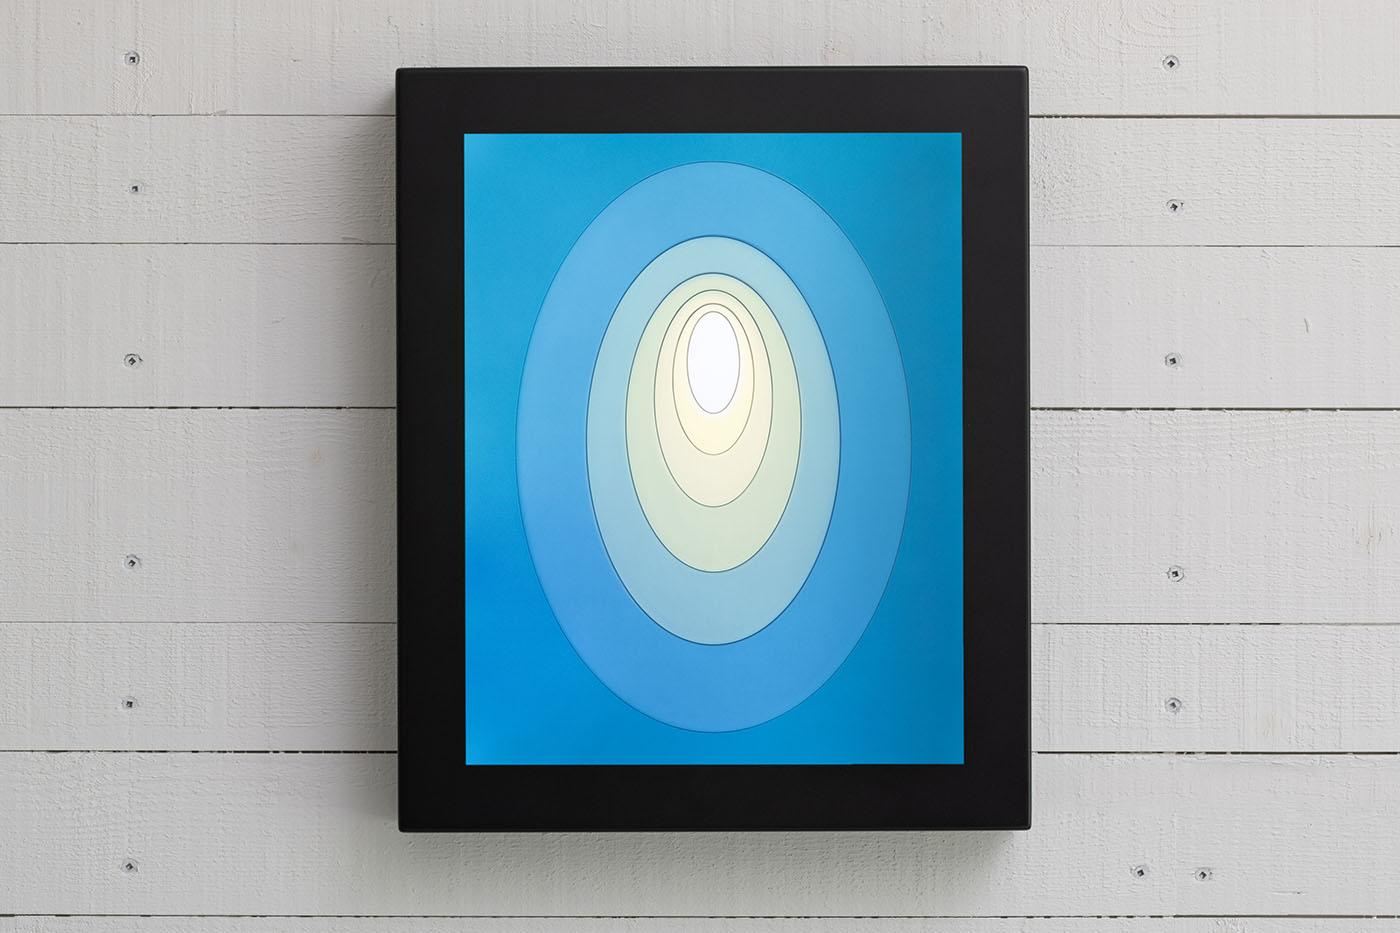 James Turrell Abstract Sculpture - Crystal light, 2022, Turrell, limited editions of 42 unique pieces, light art